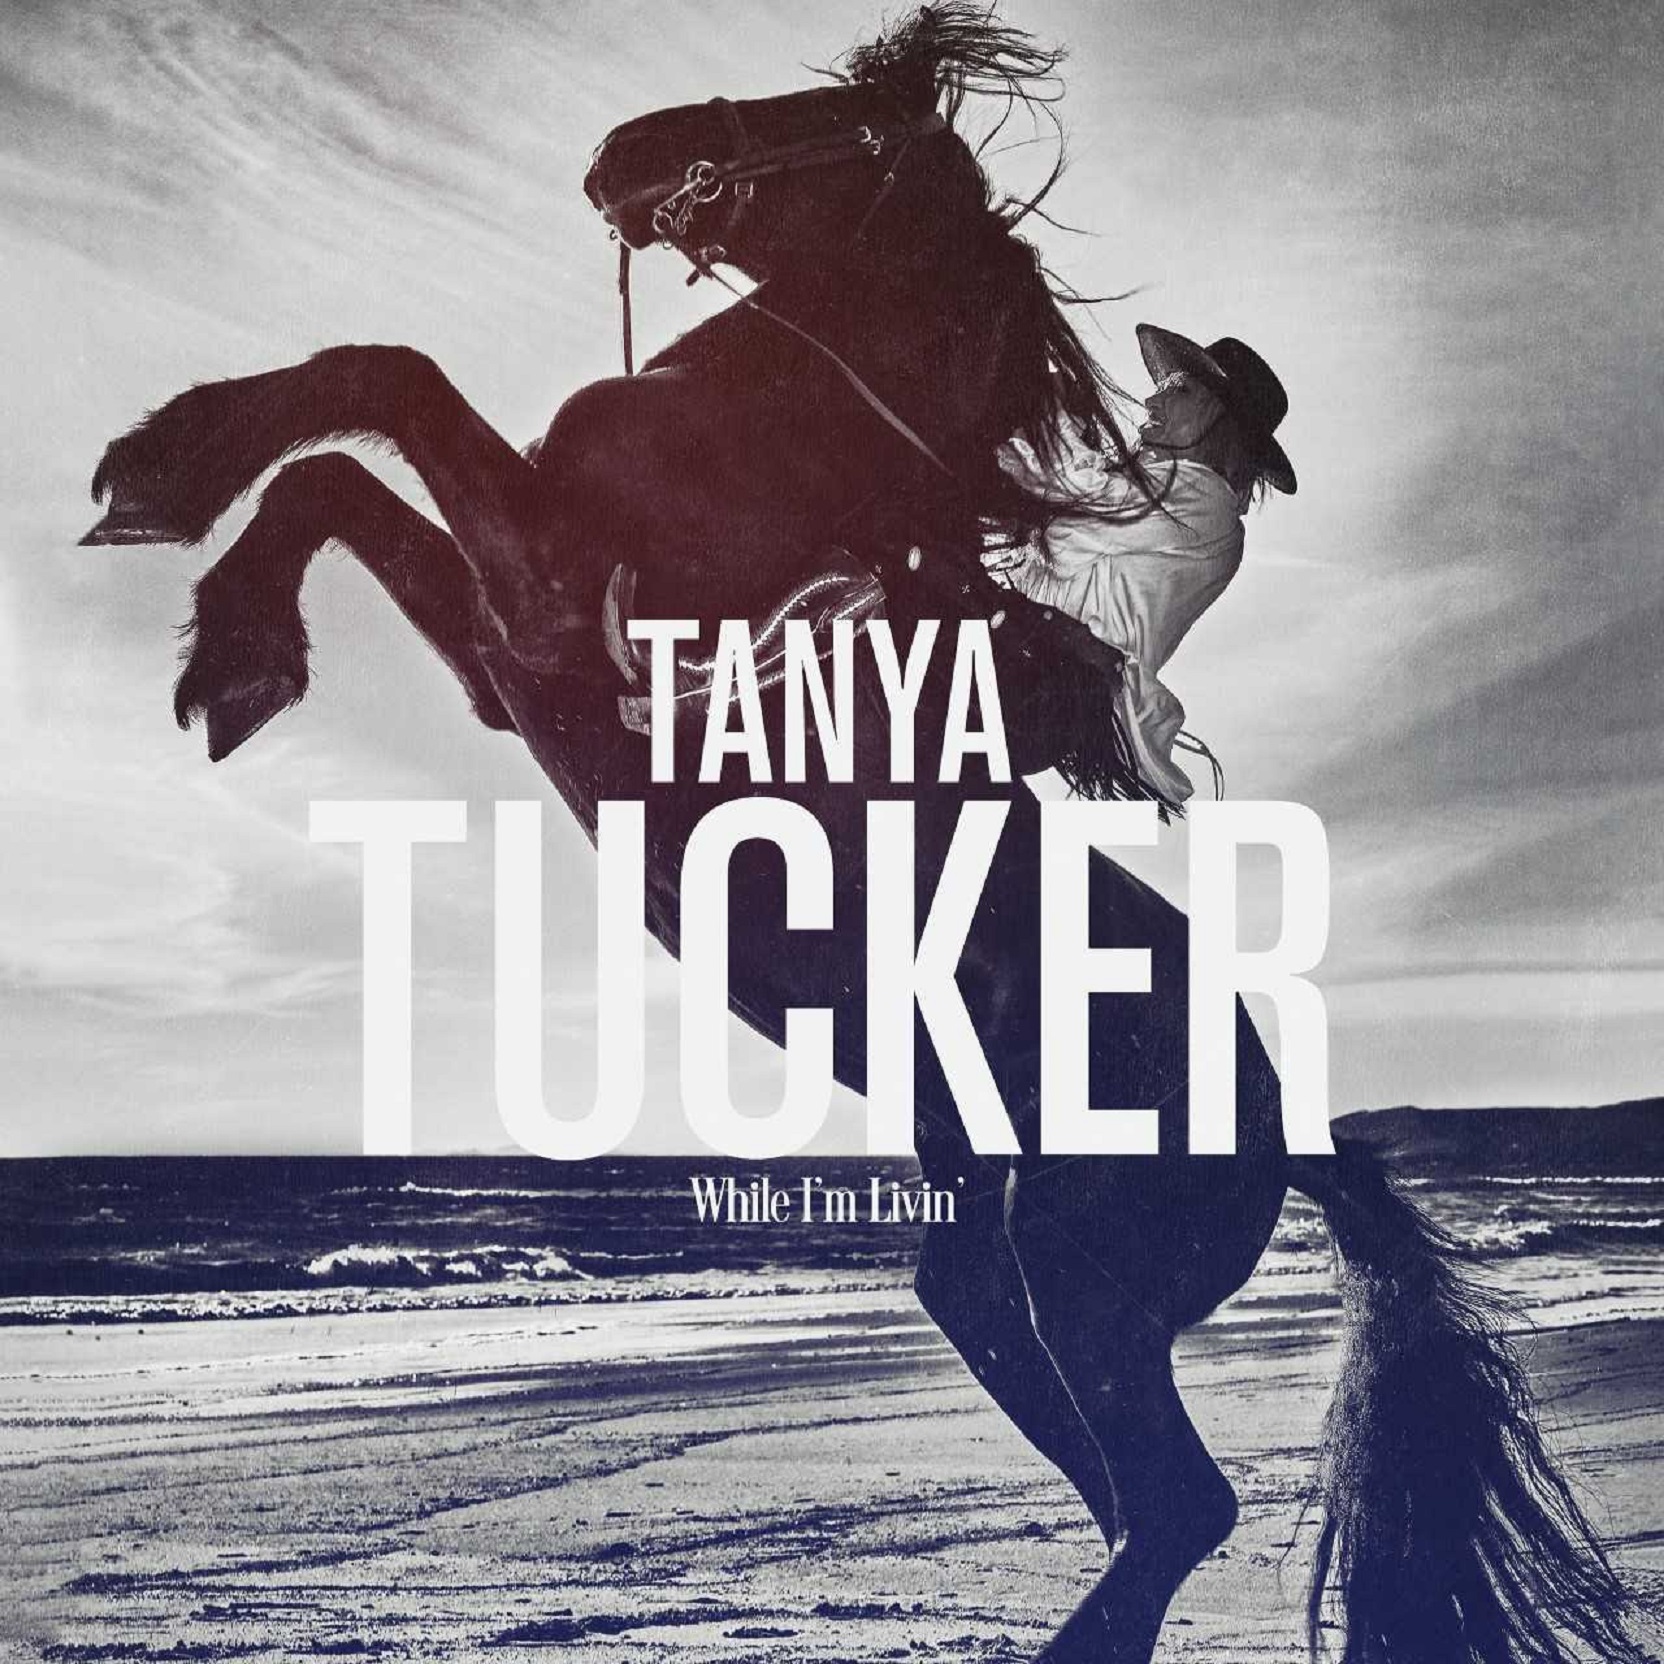 Tanya Tucker Returns After 17 Years with New Album While I'm Livin'